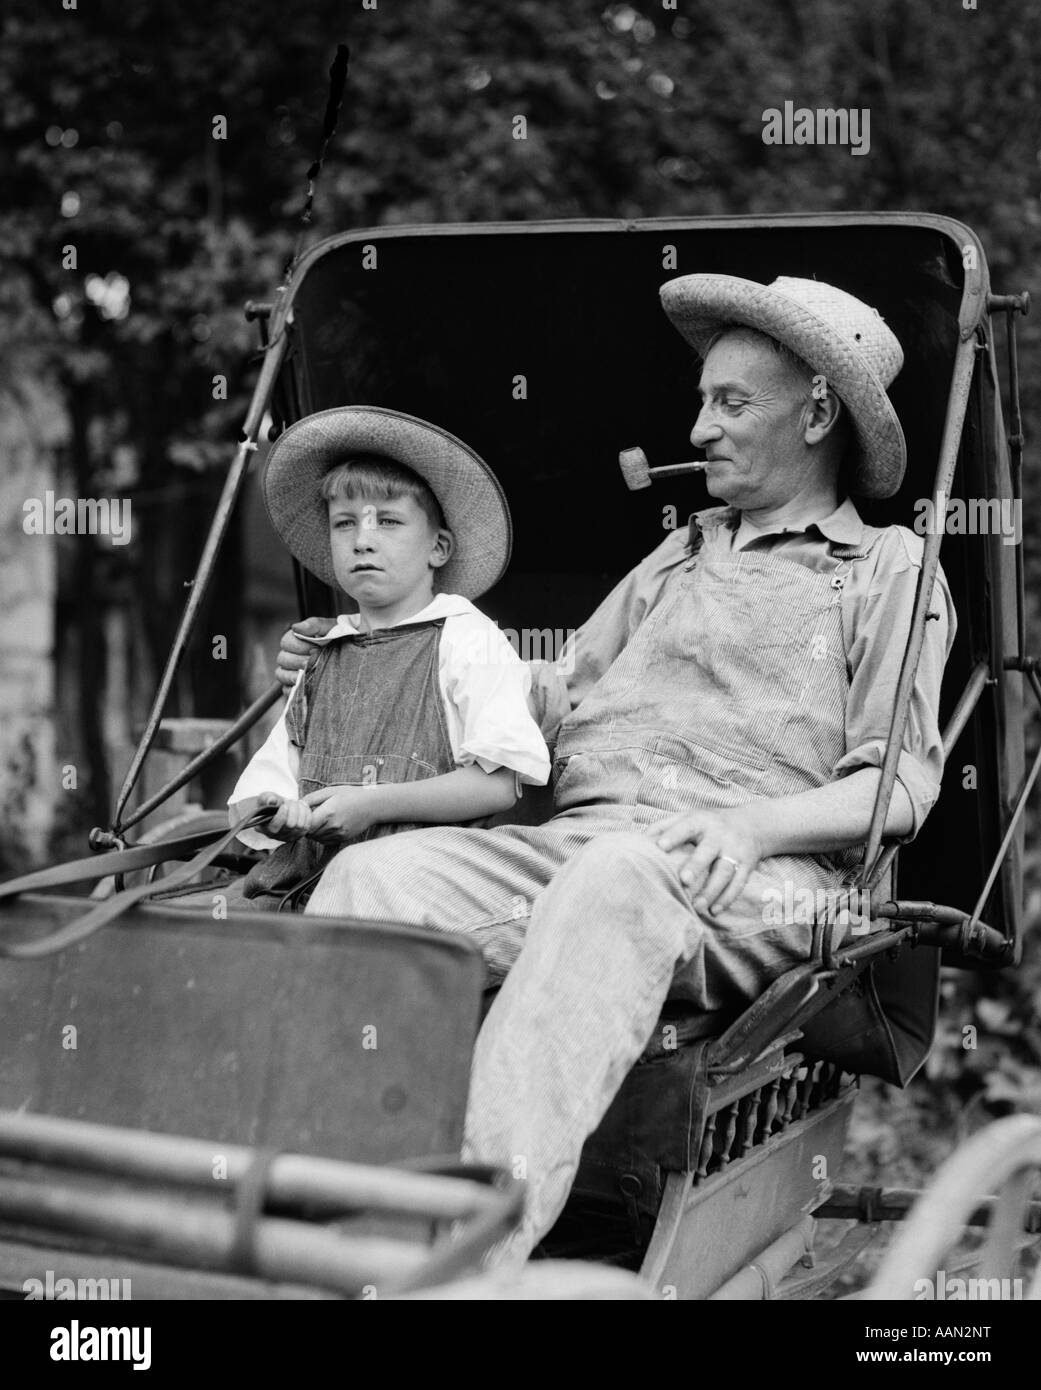 1930s FARM BOY & GRANDFATHER IN OVERALLS & STRAW HATS SITTING IN SMALL BUGGY Stock Photo